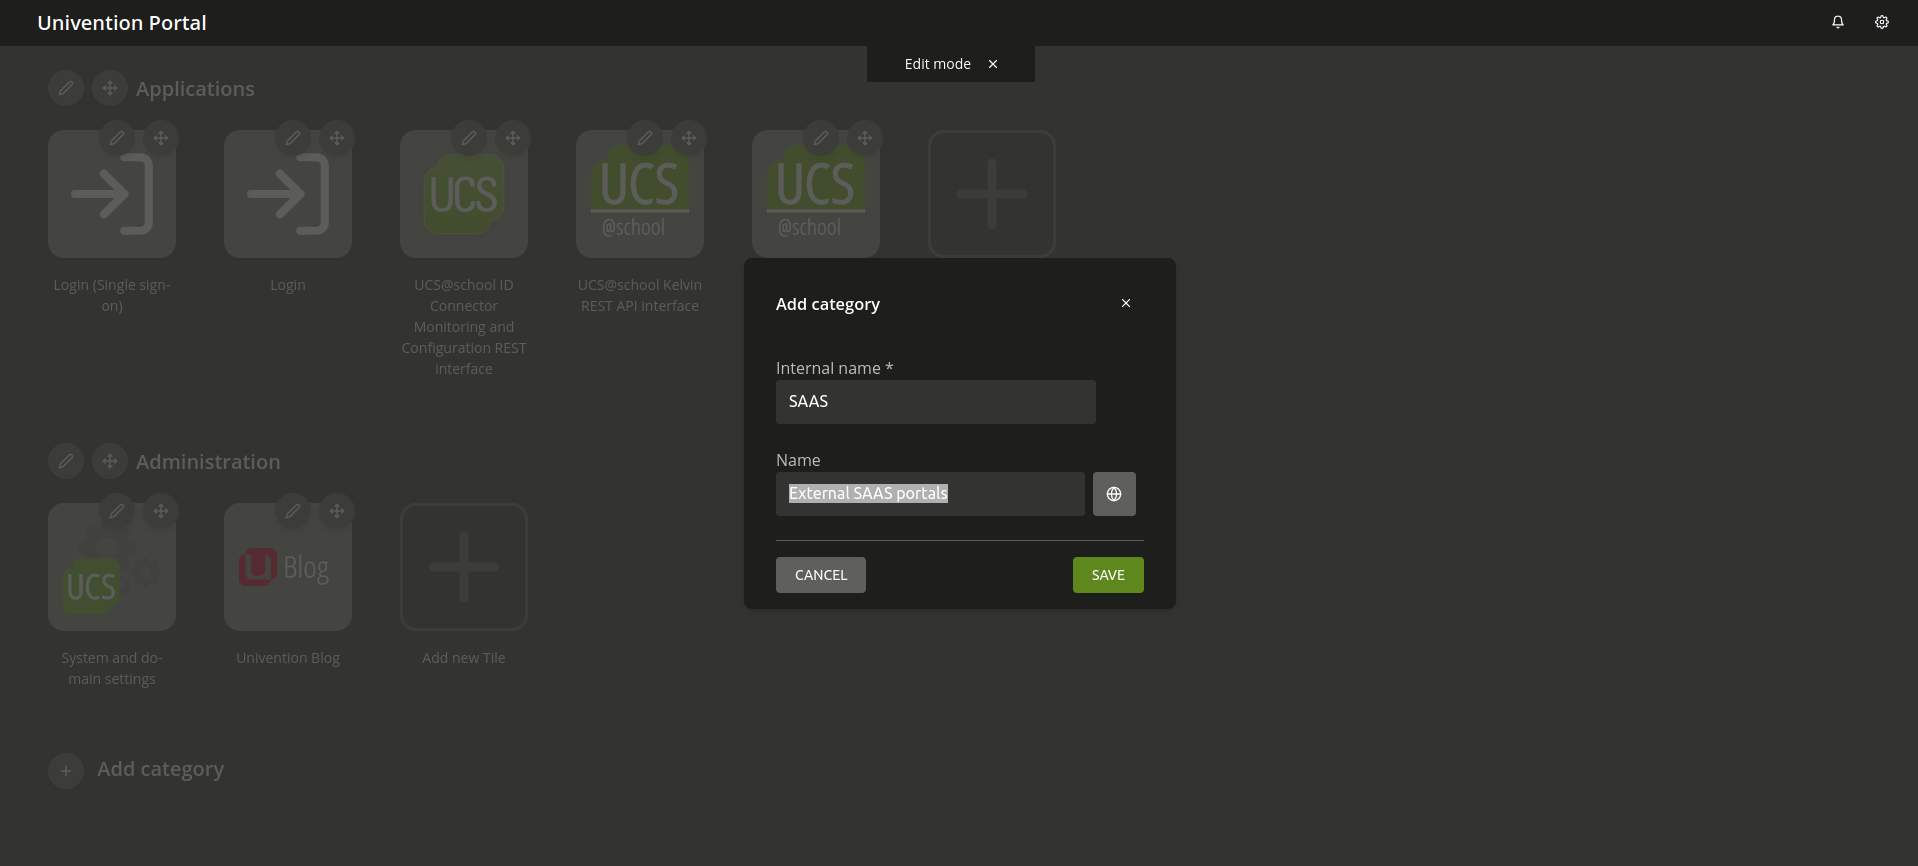 Graphical edit mode of the portal in UCS 5.0